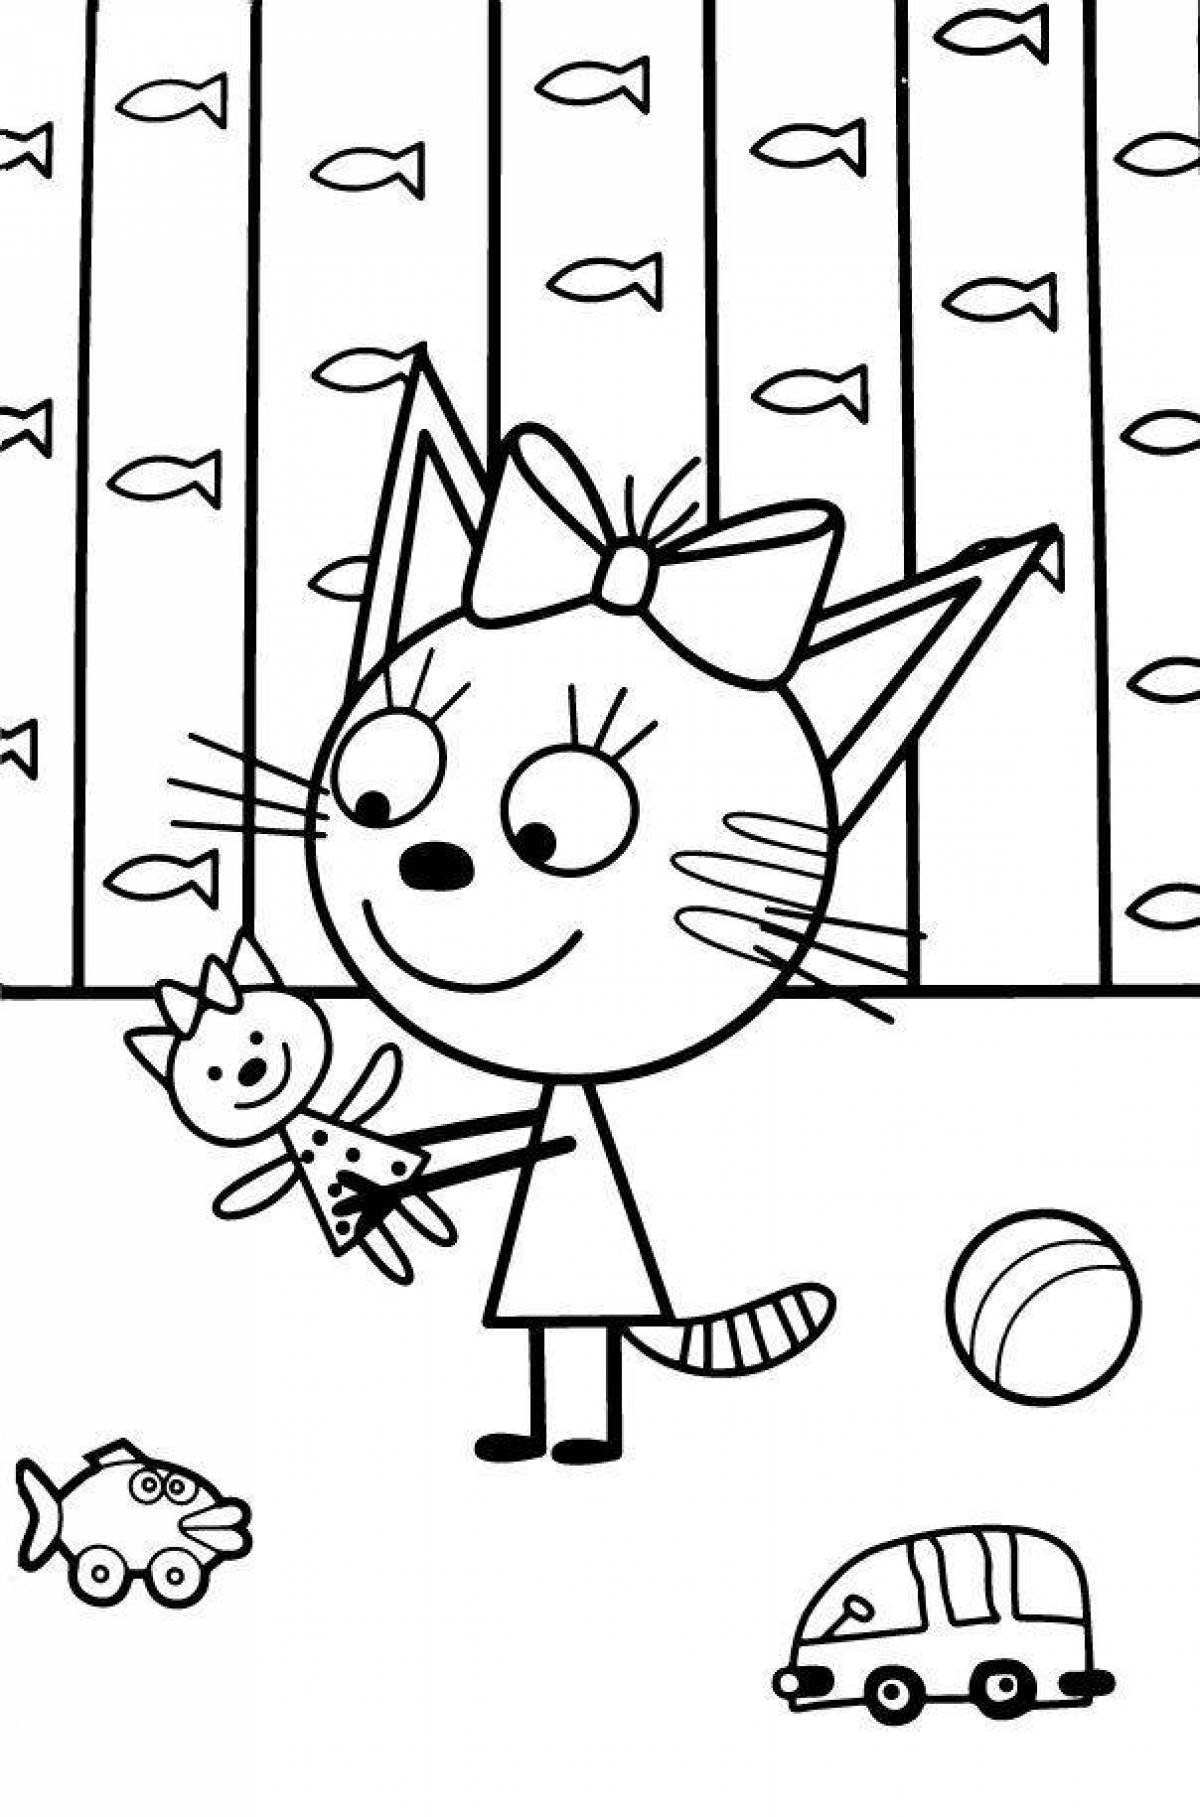 Three cats holiday coloring book for girls